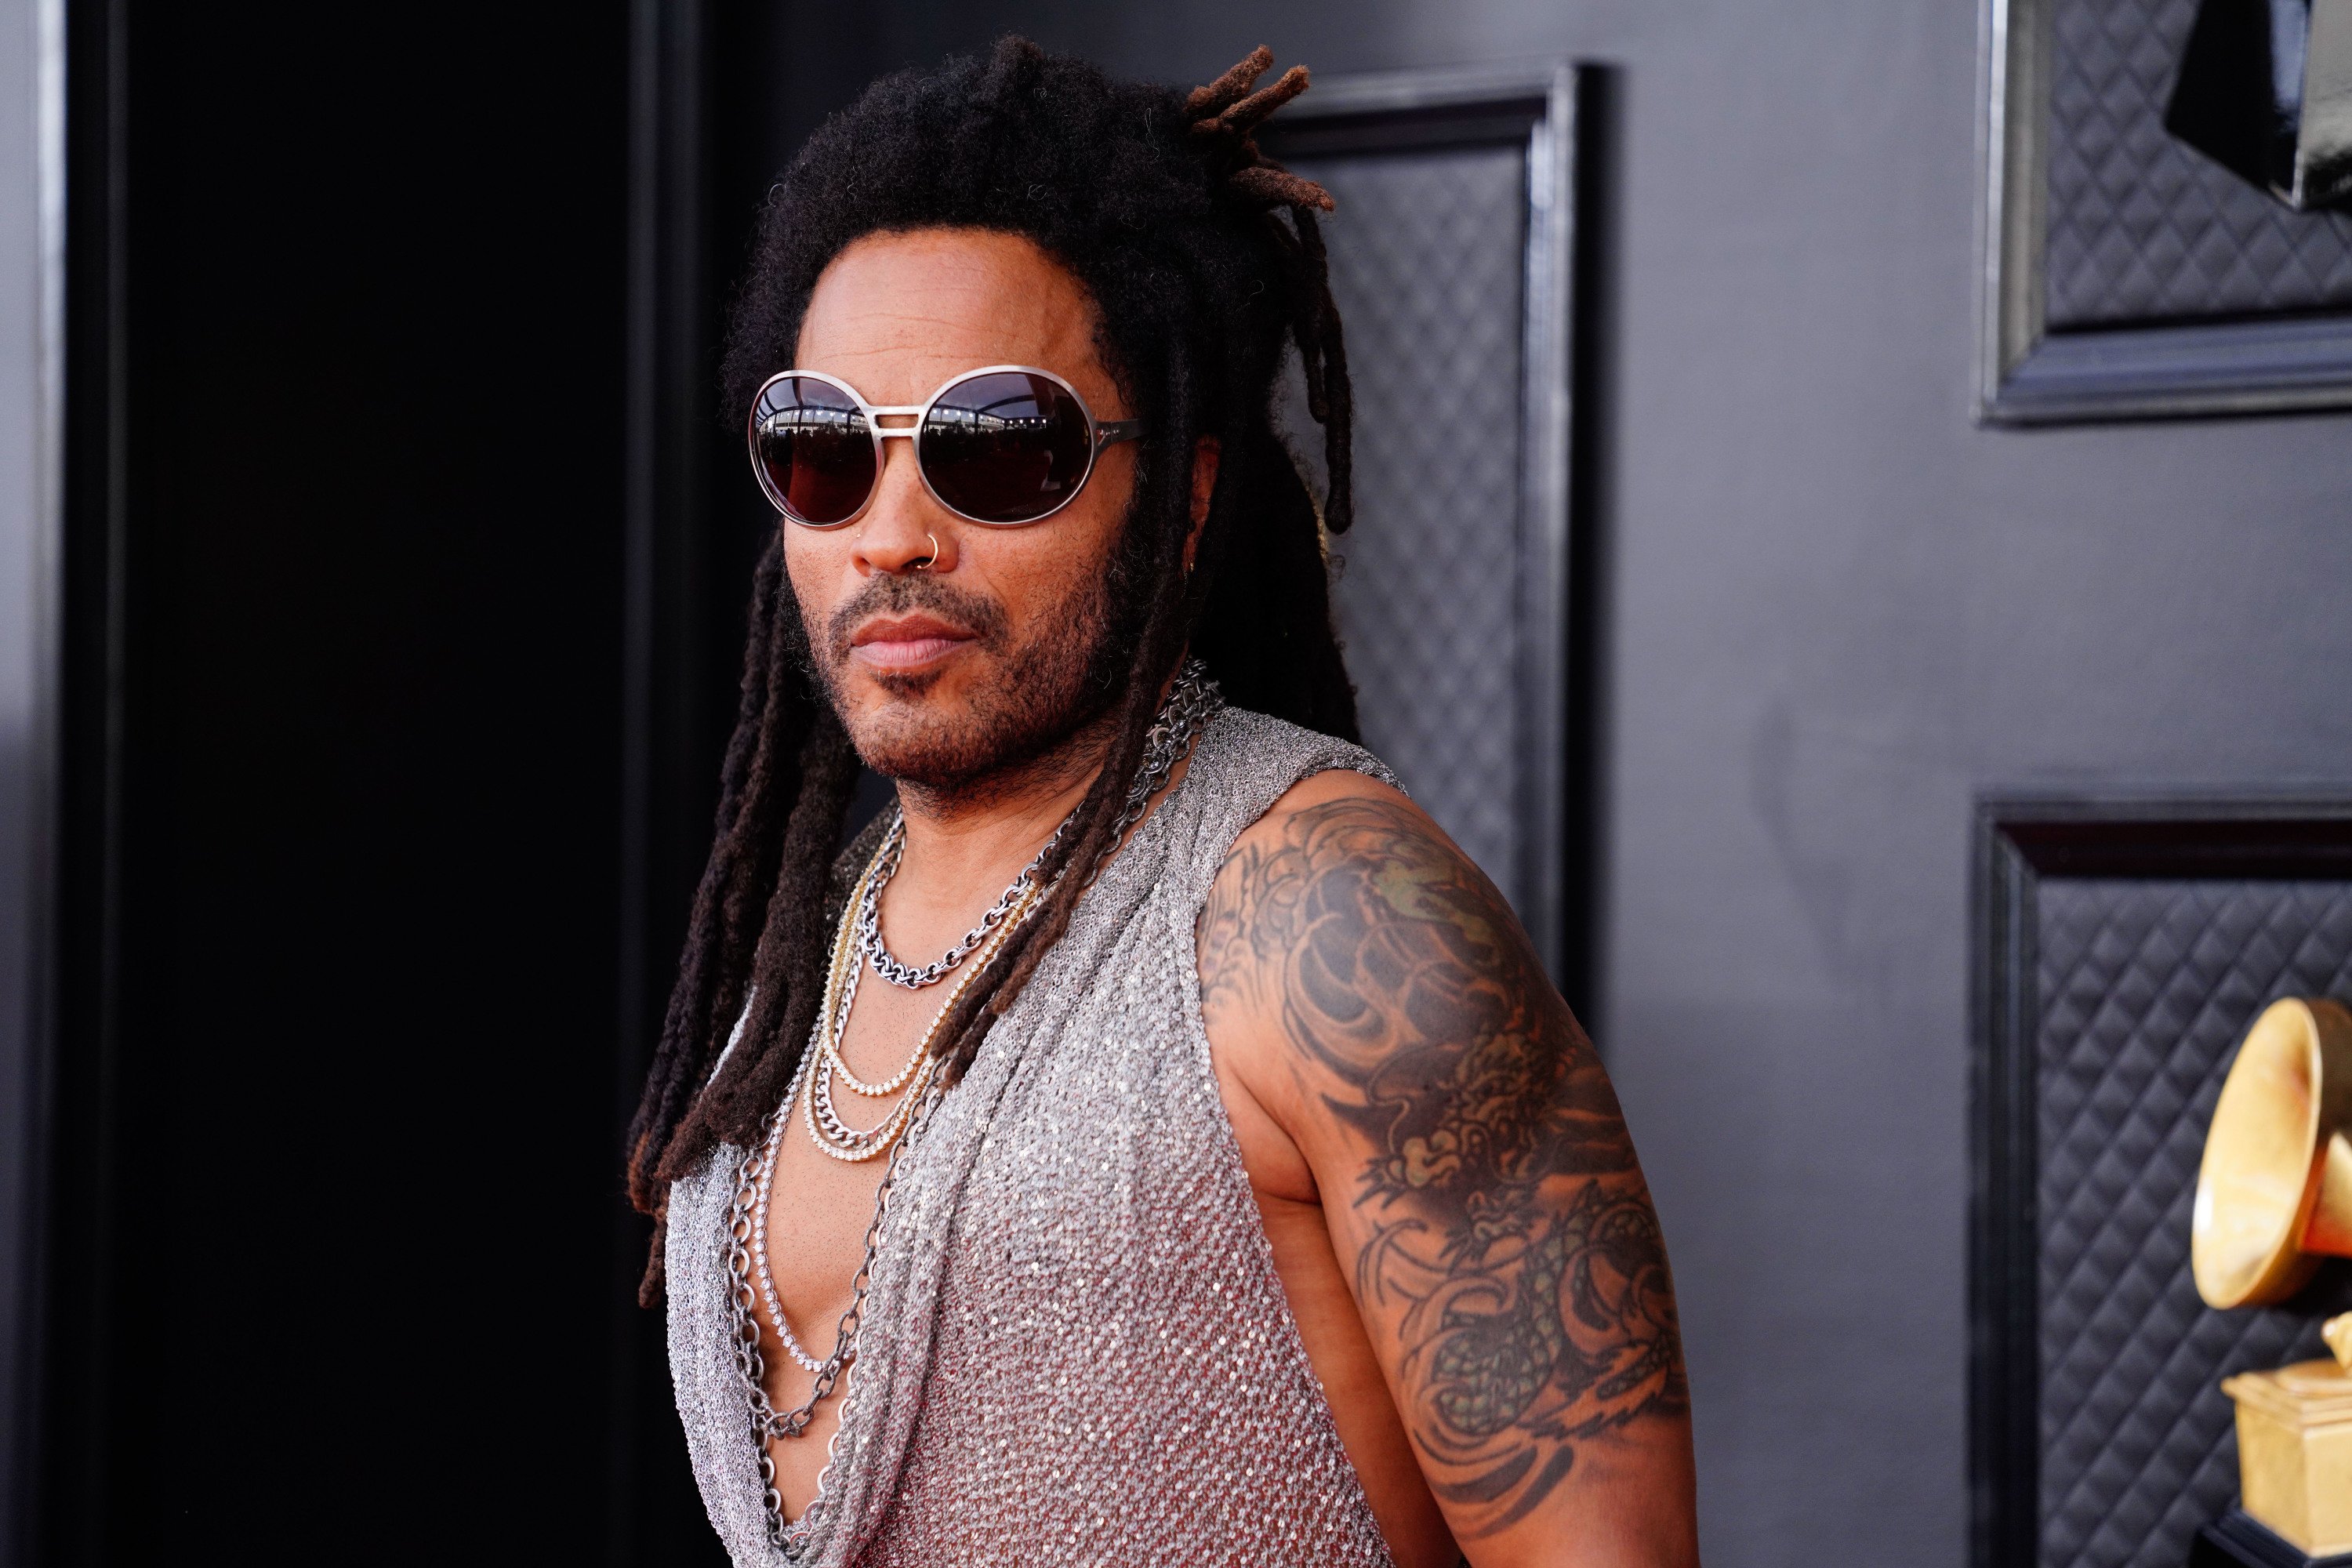 Lenny Kravitz poses on the red carpet while wearing a sheer silver shirt, sunglasses, and leather pants.